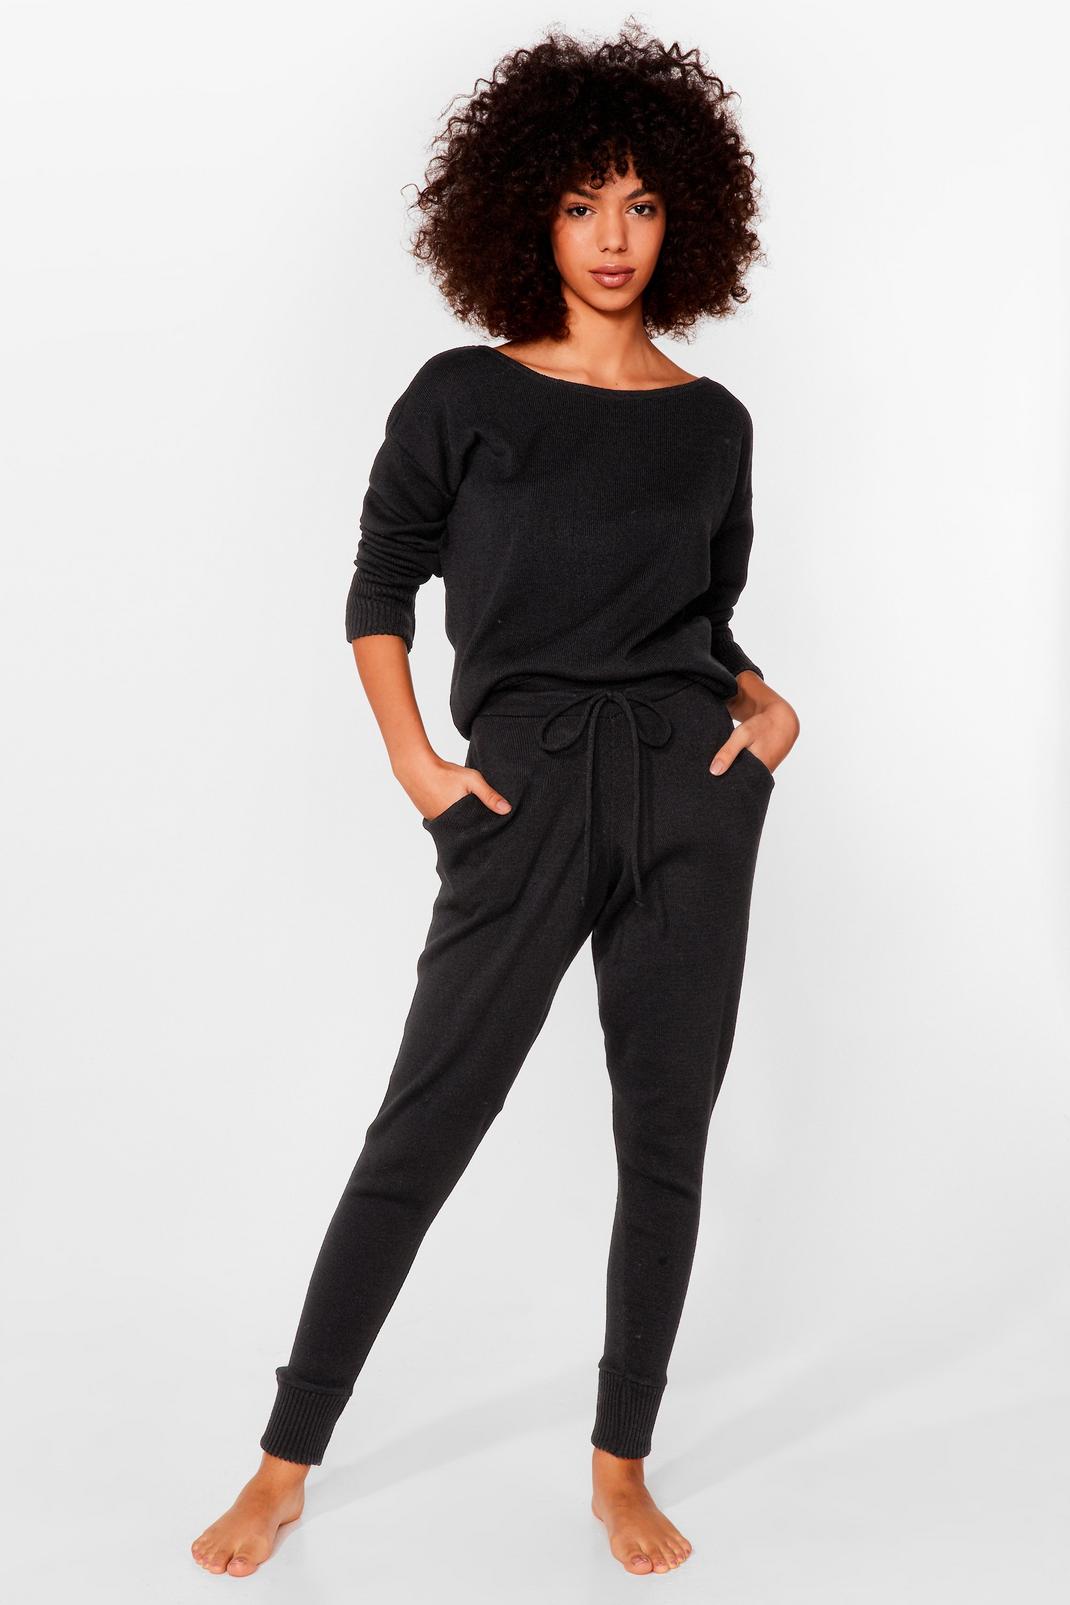 Weekend Loading Knit Jumper and Joggers | Nasty Gal